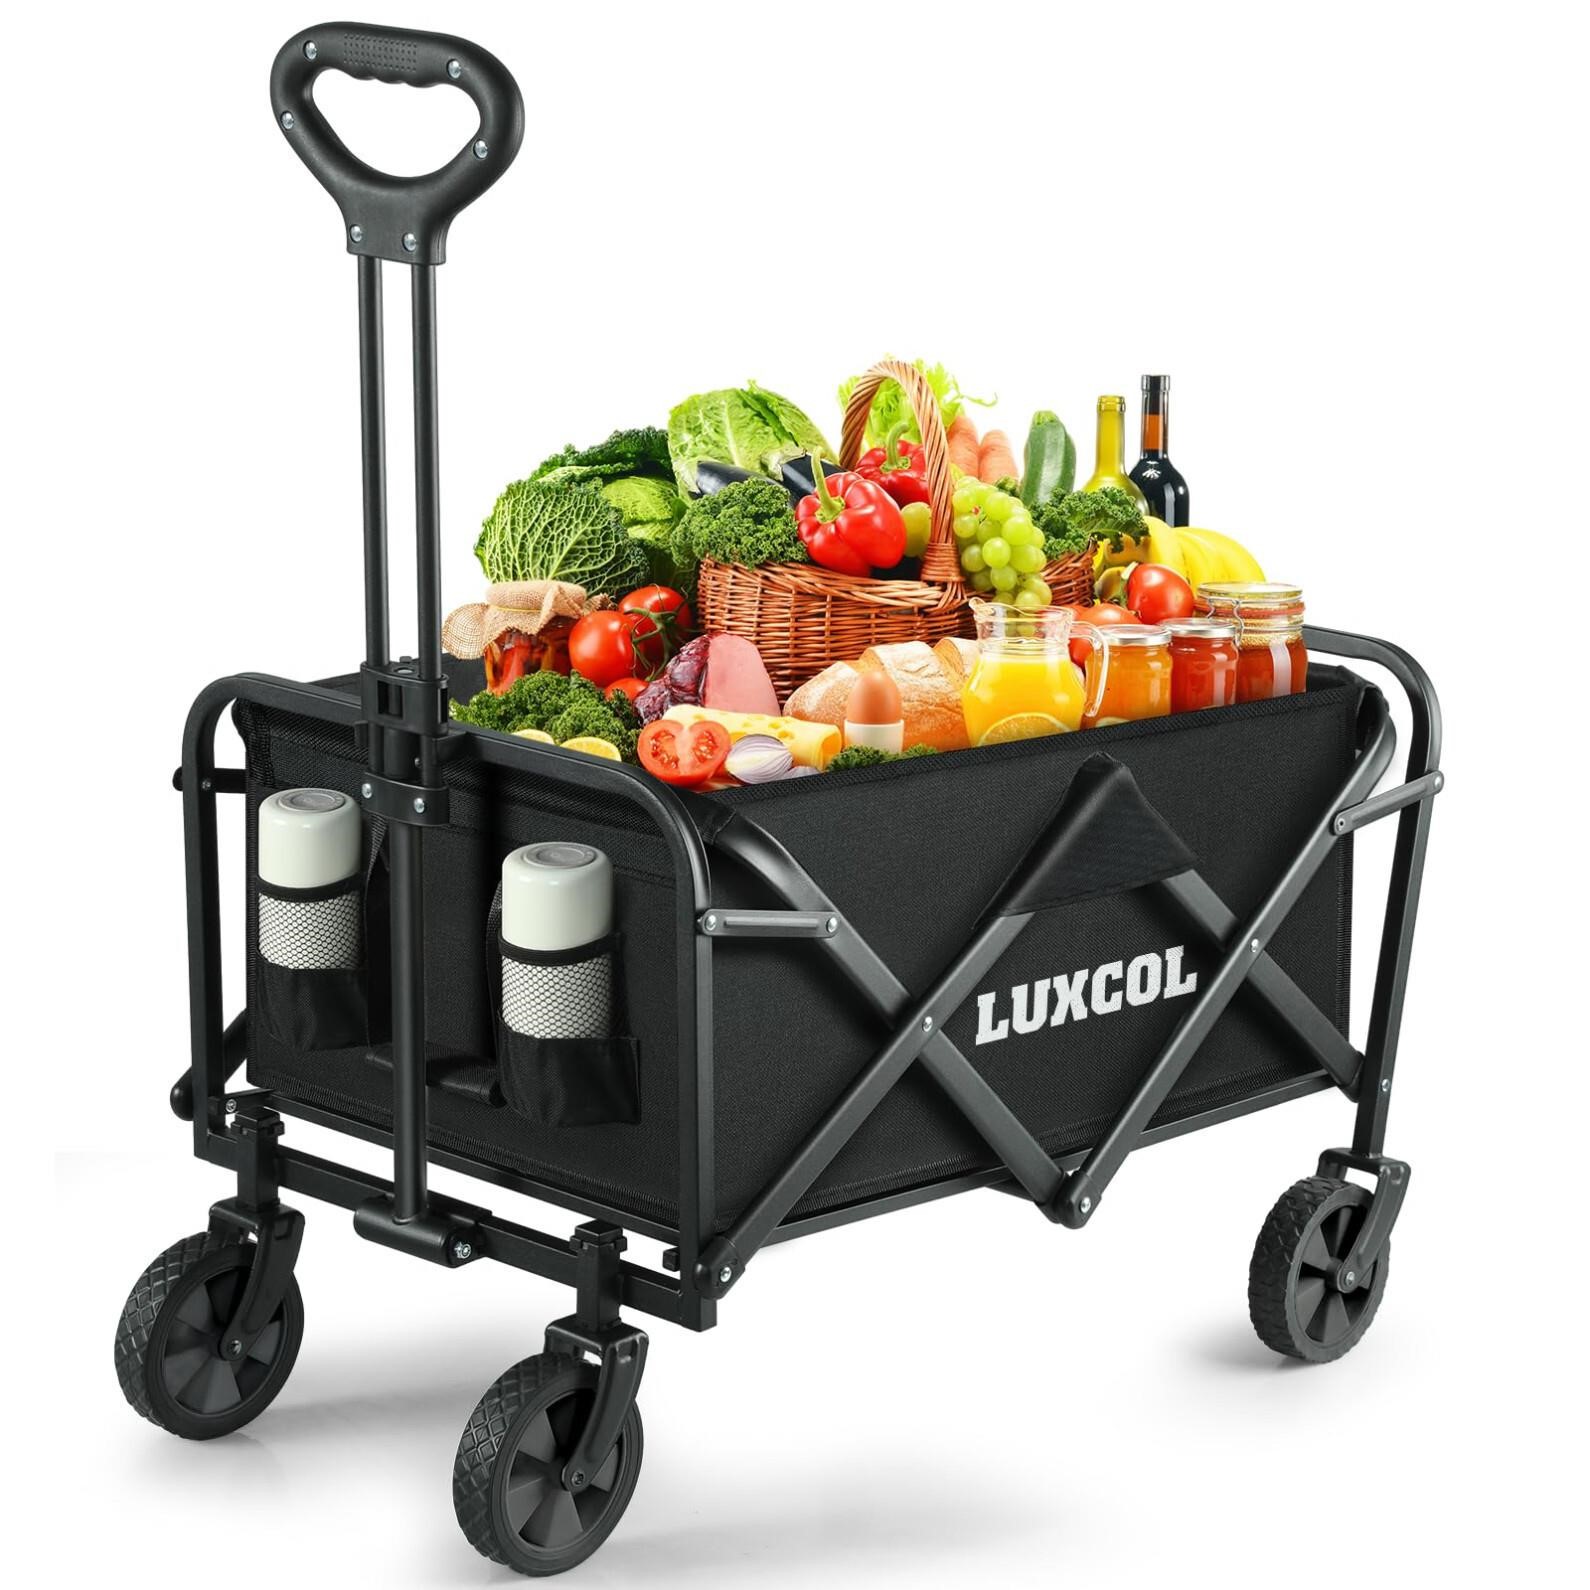 LUXCOL Collapsible Folding Outdoor Utility Wagon,B